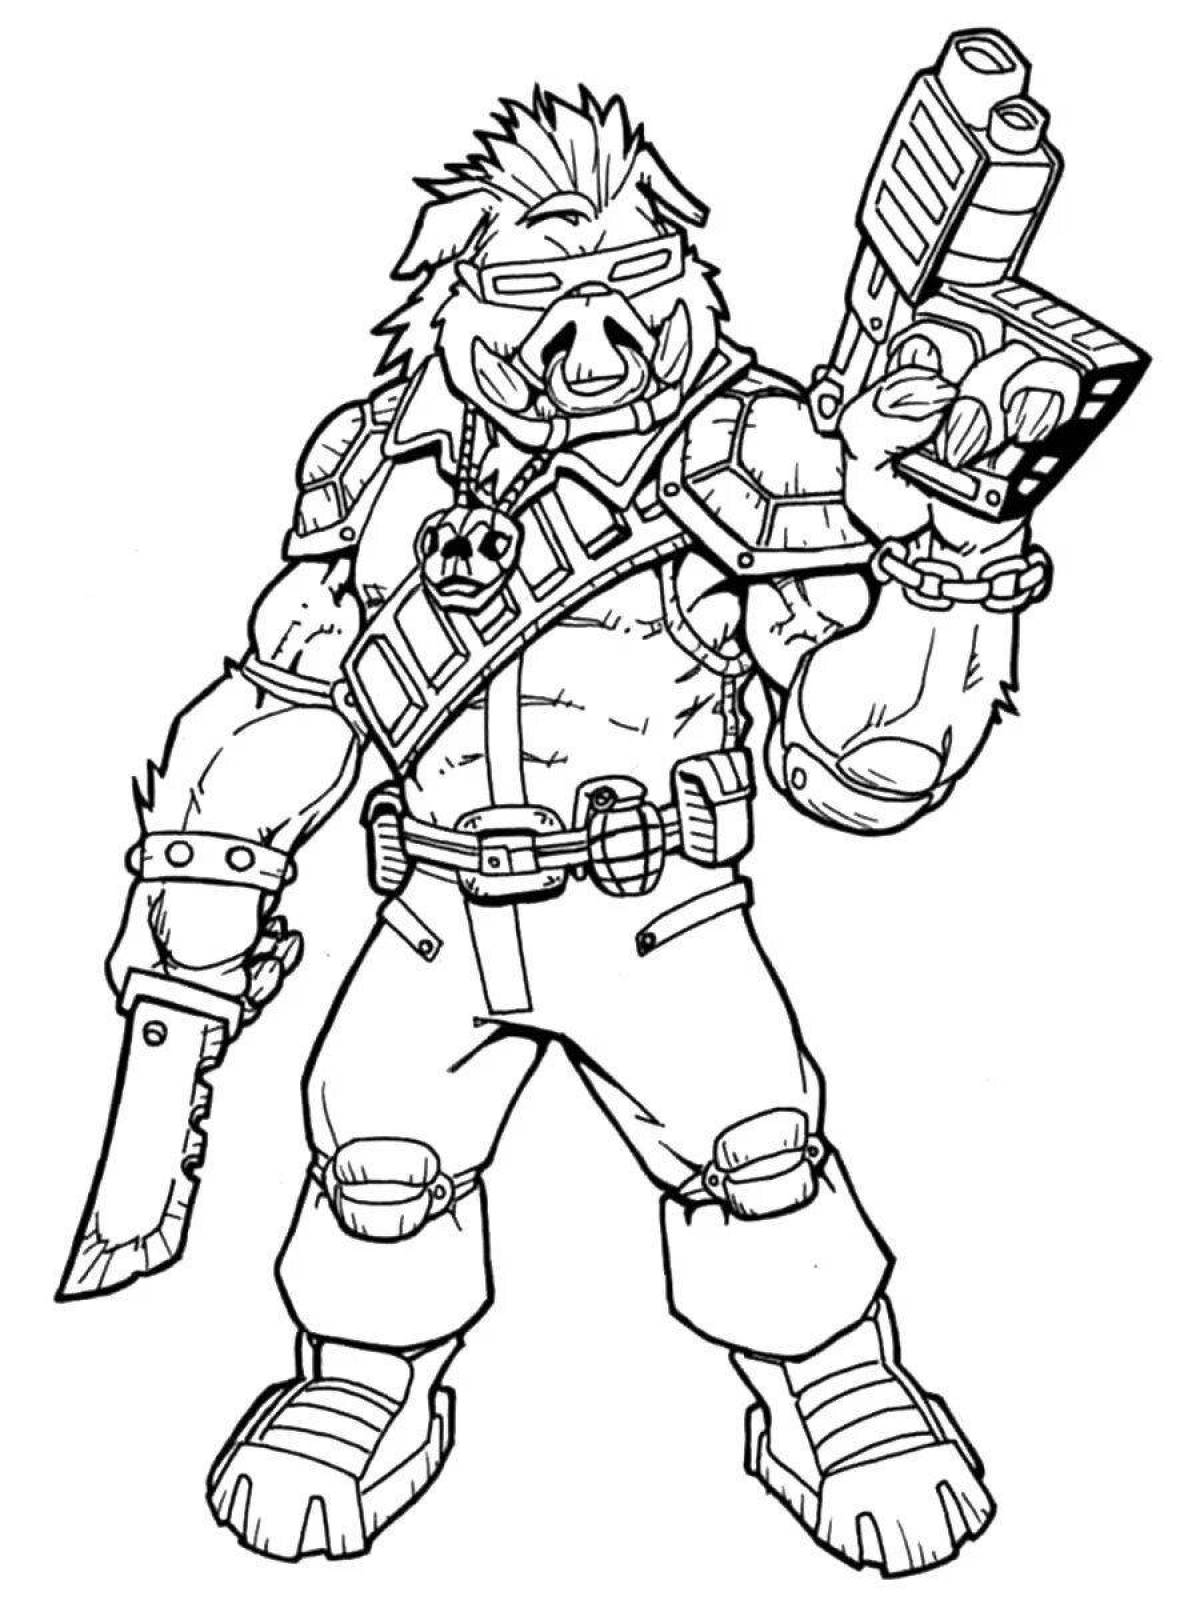 Detailed mutant coloring page